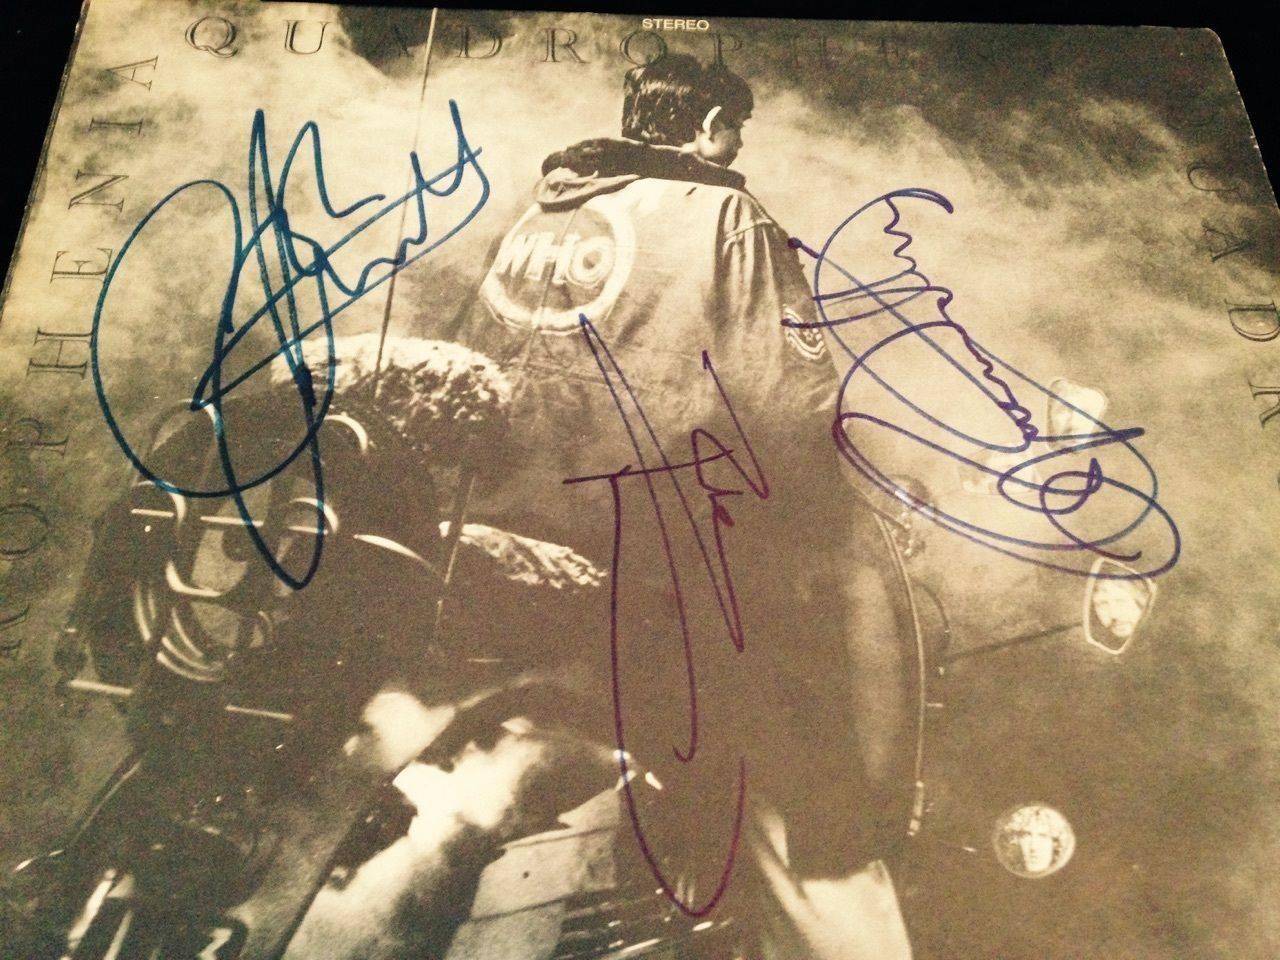 The Who Album Quadrophenia autographed by Roger Daltrey, Peter Townsend and John Entwistle all of these autographs were obtained in person by the seller in the 1990s.The other autographed Album is Tommy also signed by Roger Daltrey, Peter Townsend